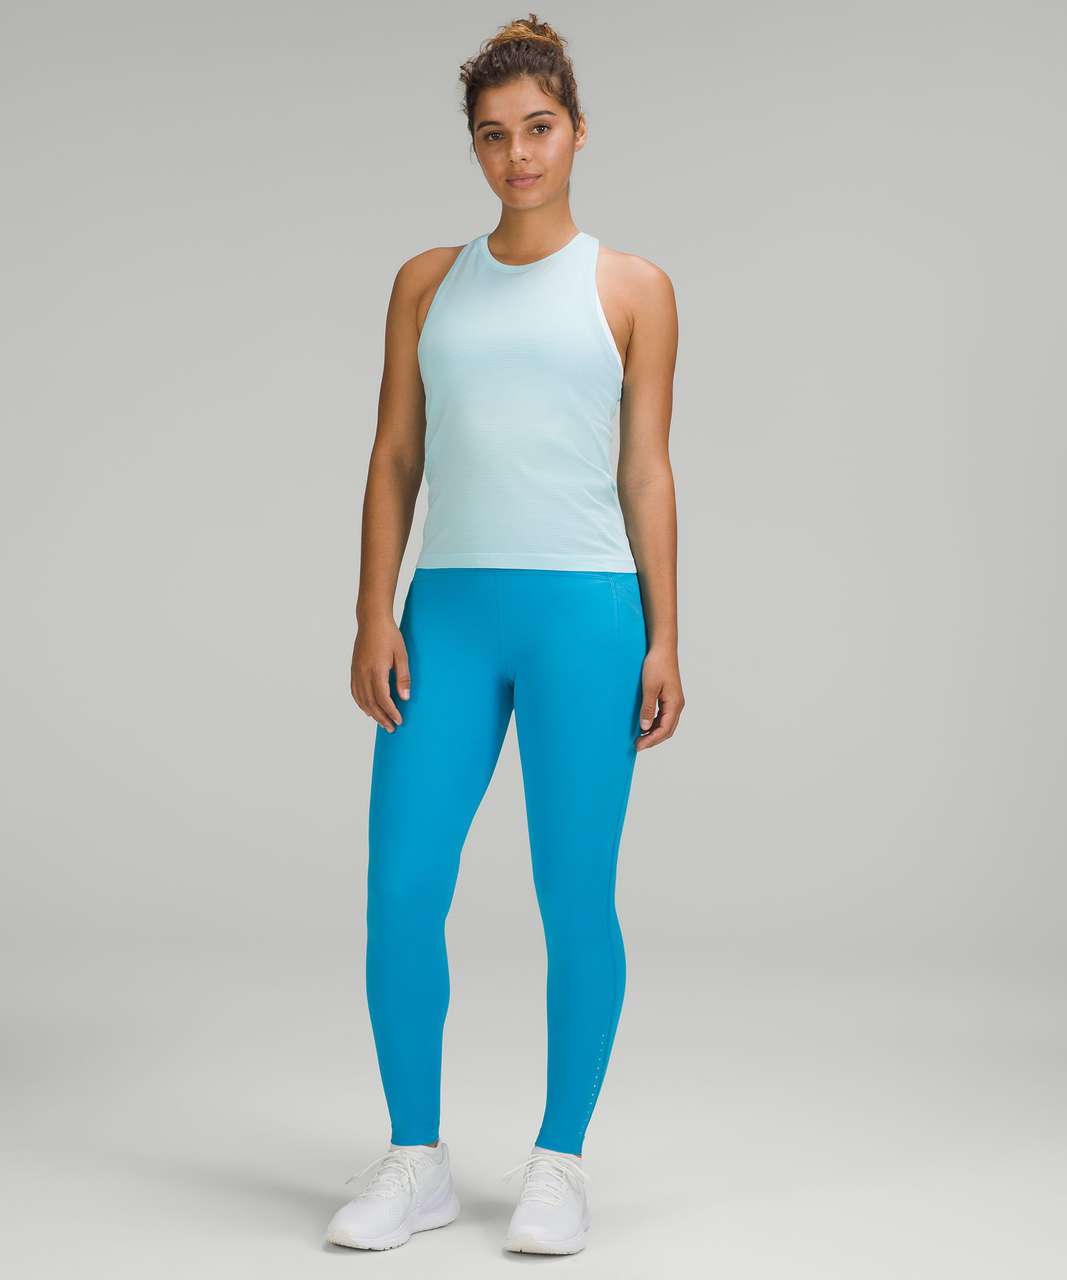 Lululemon NEW Swift Speed High-Rise Tight 28 Turquoise Tide Pockets Size 14  - $62 New With Tags - From weilu